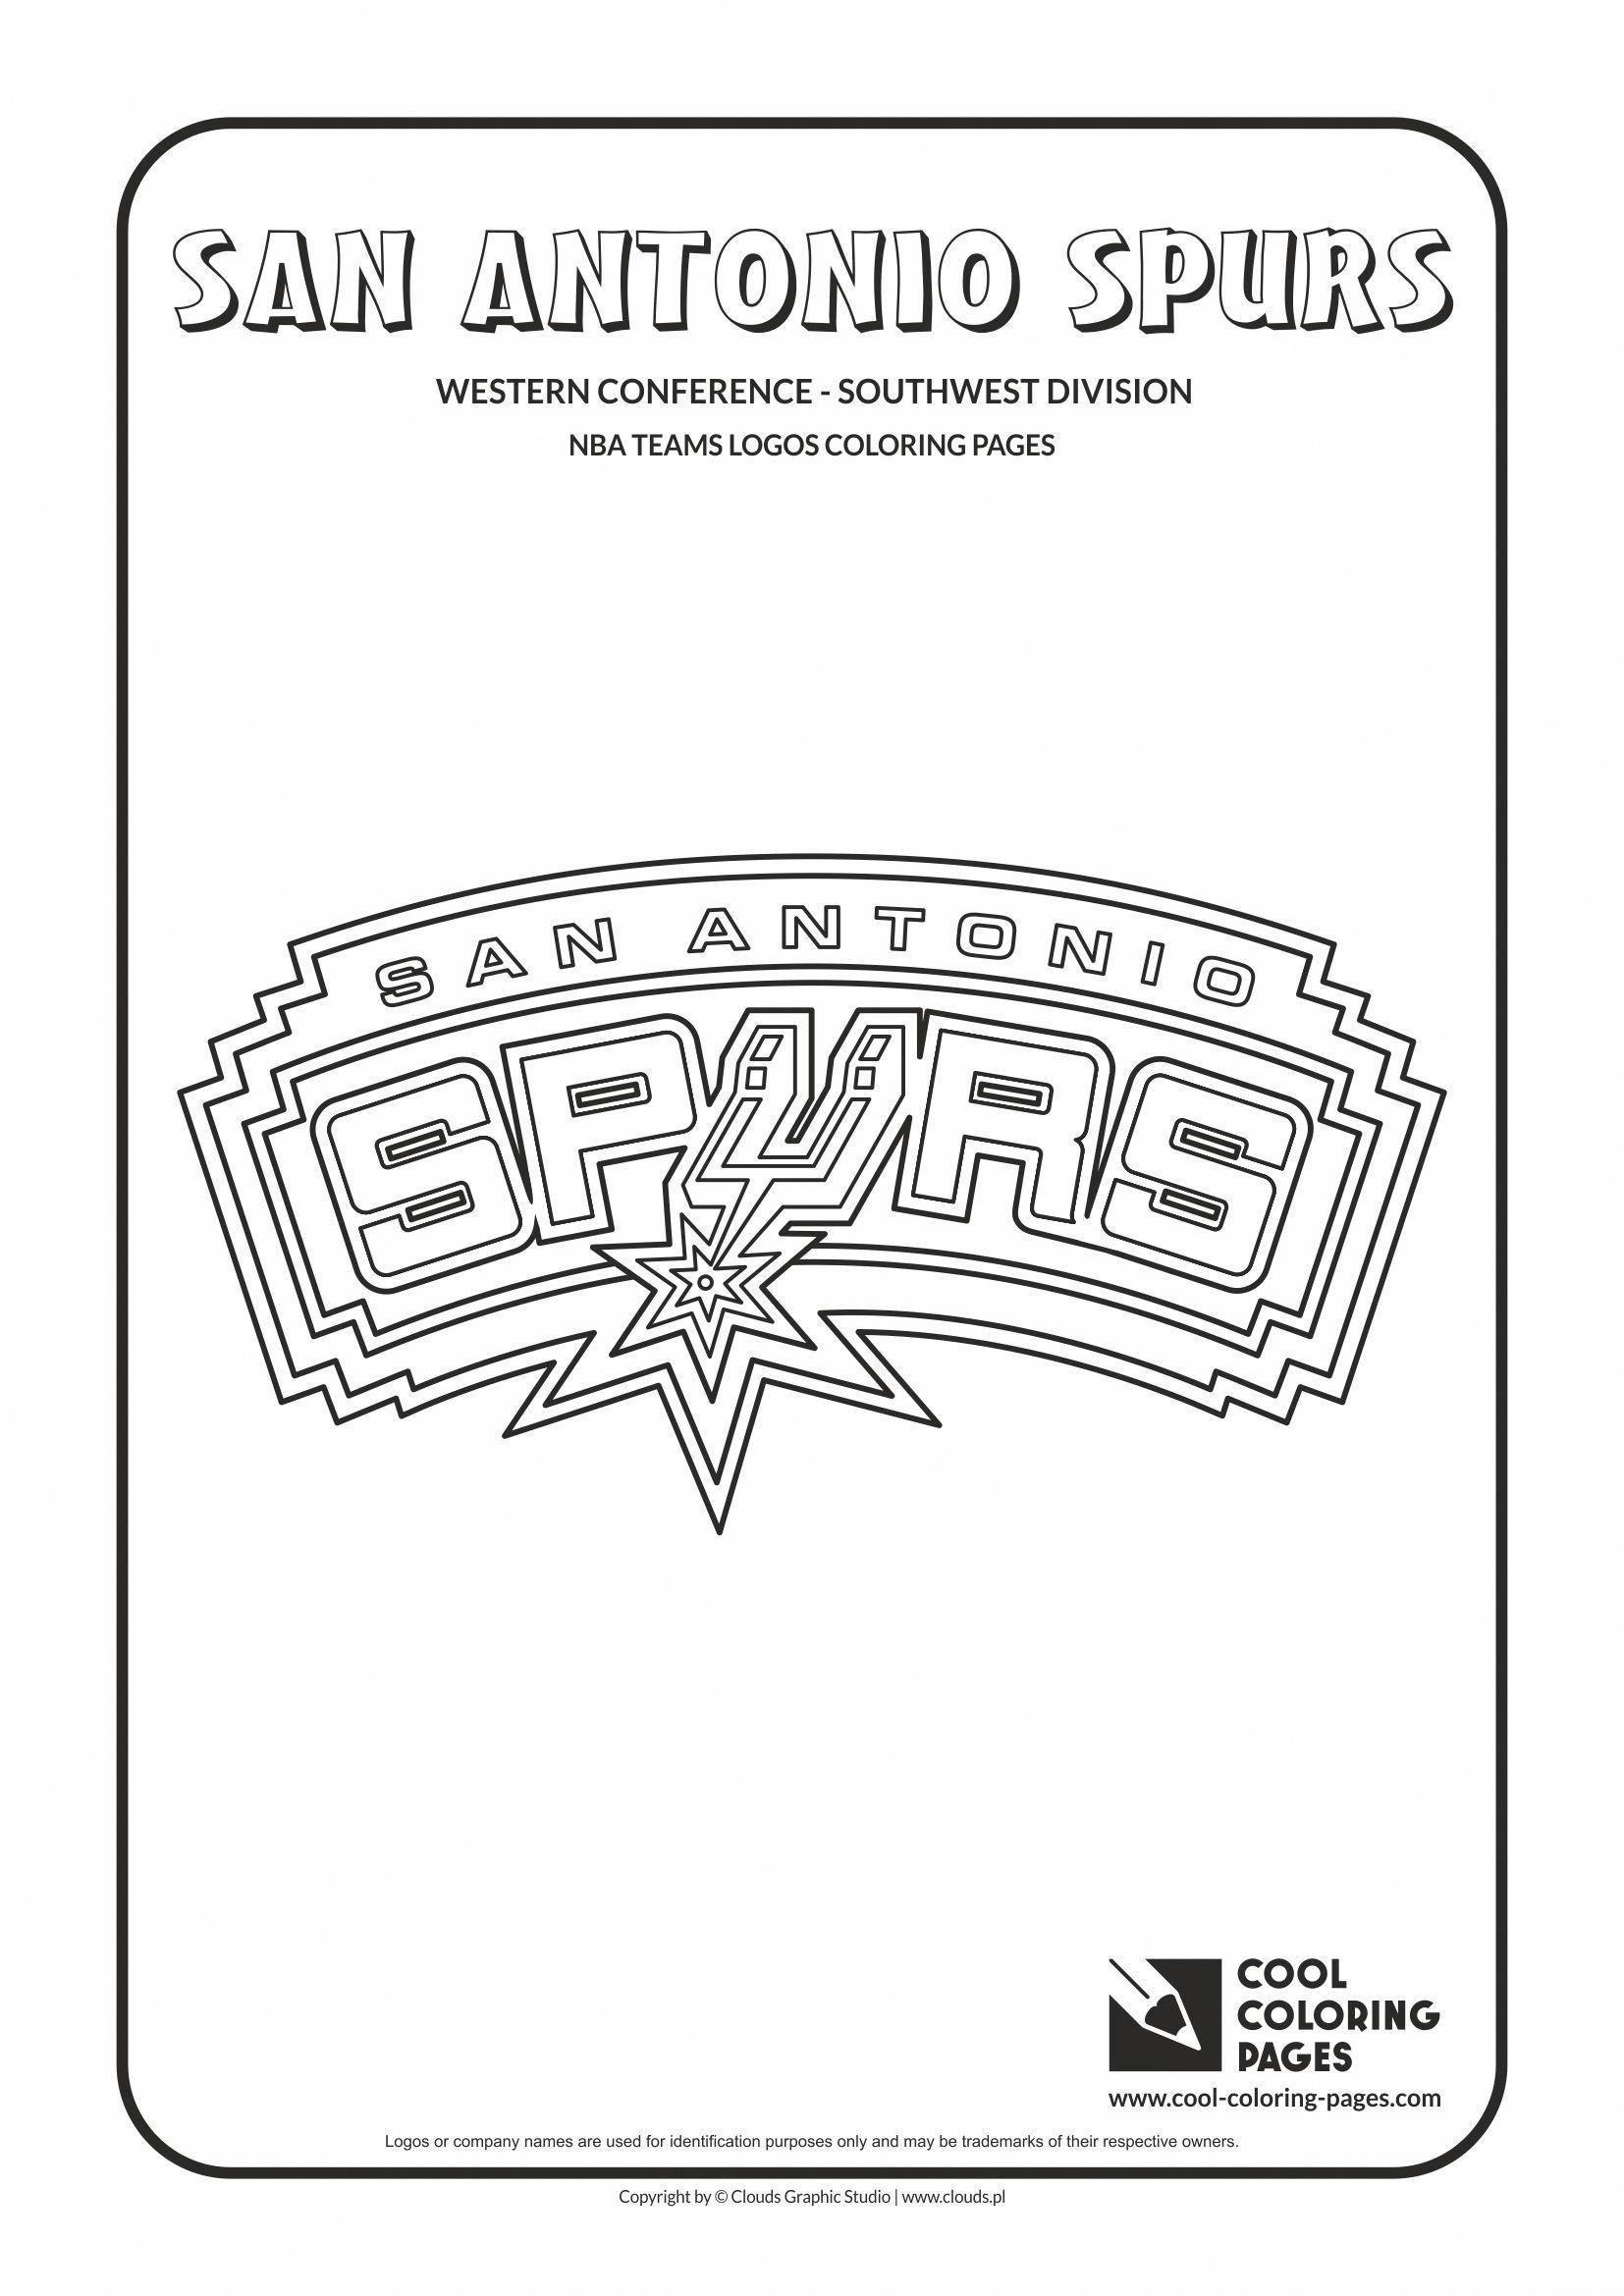 Cool VG Logo - Cool Coloring Pages - NBA Basketball Clubs Logos - Western ...